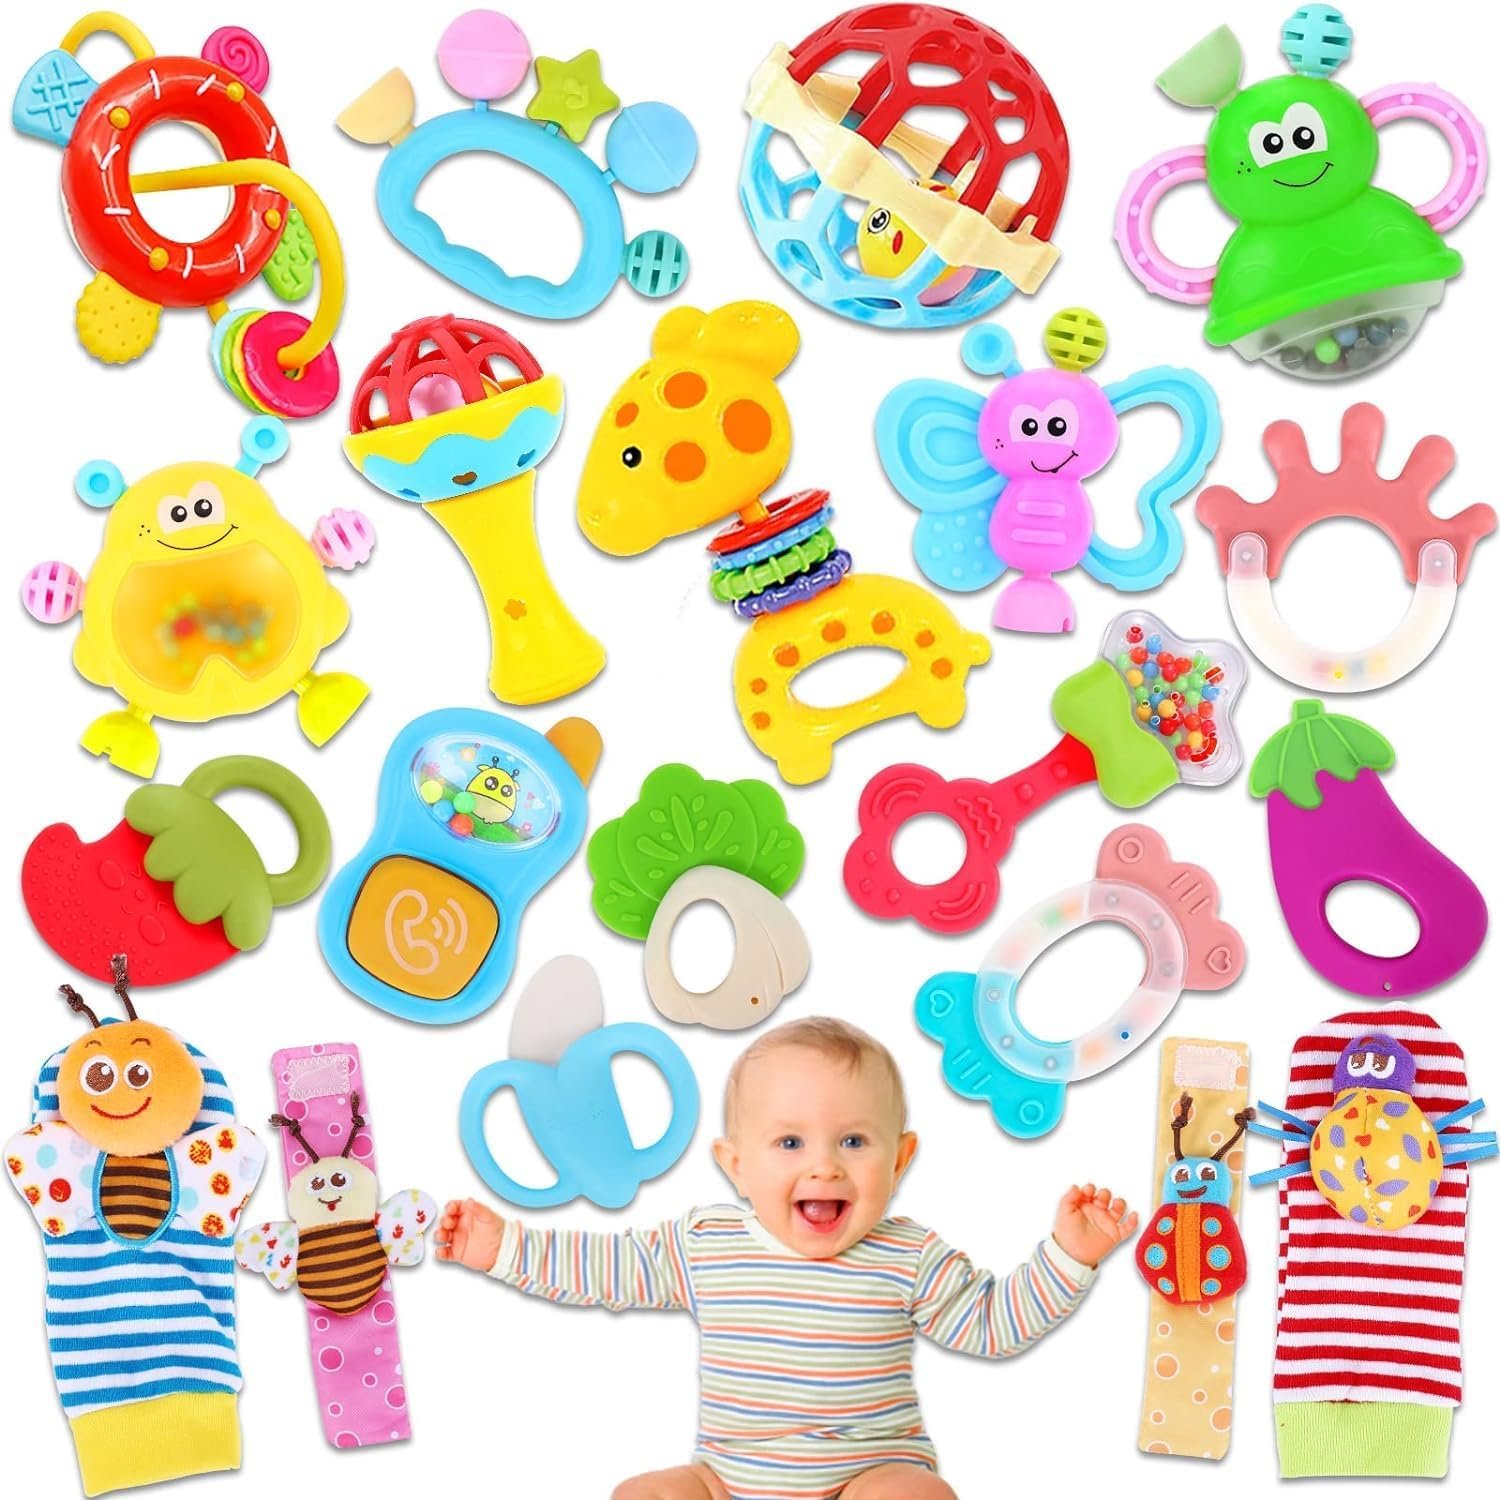 AZEN Baby Toys 3-6 Months Review